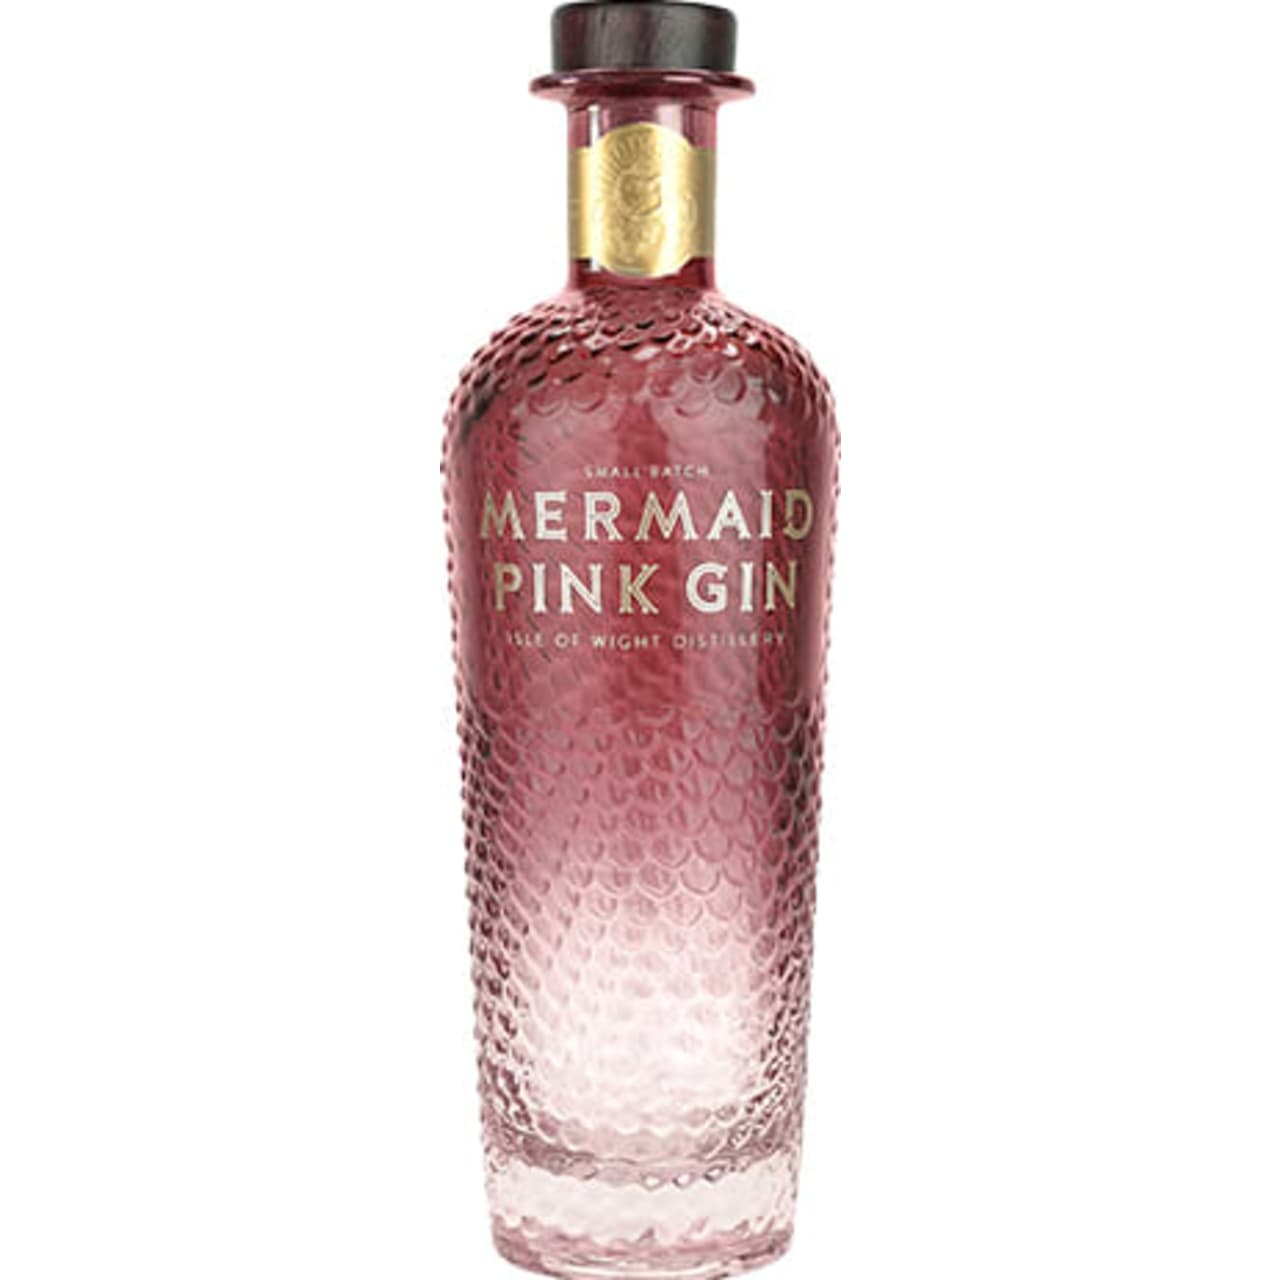 Mermaid Pink Gin at infuses the flavour and aromatics of Island strawberries with the smooth yet complex taste of the award-winning Mermaid Gin, a blend of lemon zest, grains of paradise and fragrant rock samphire.